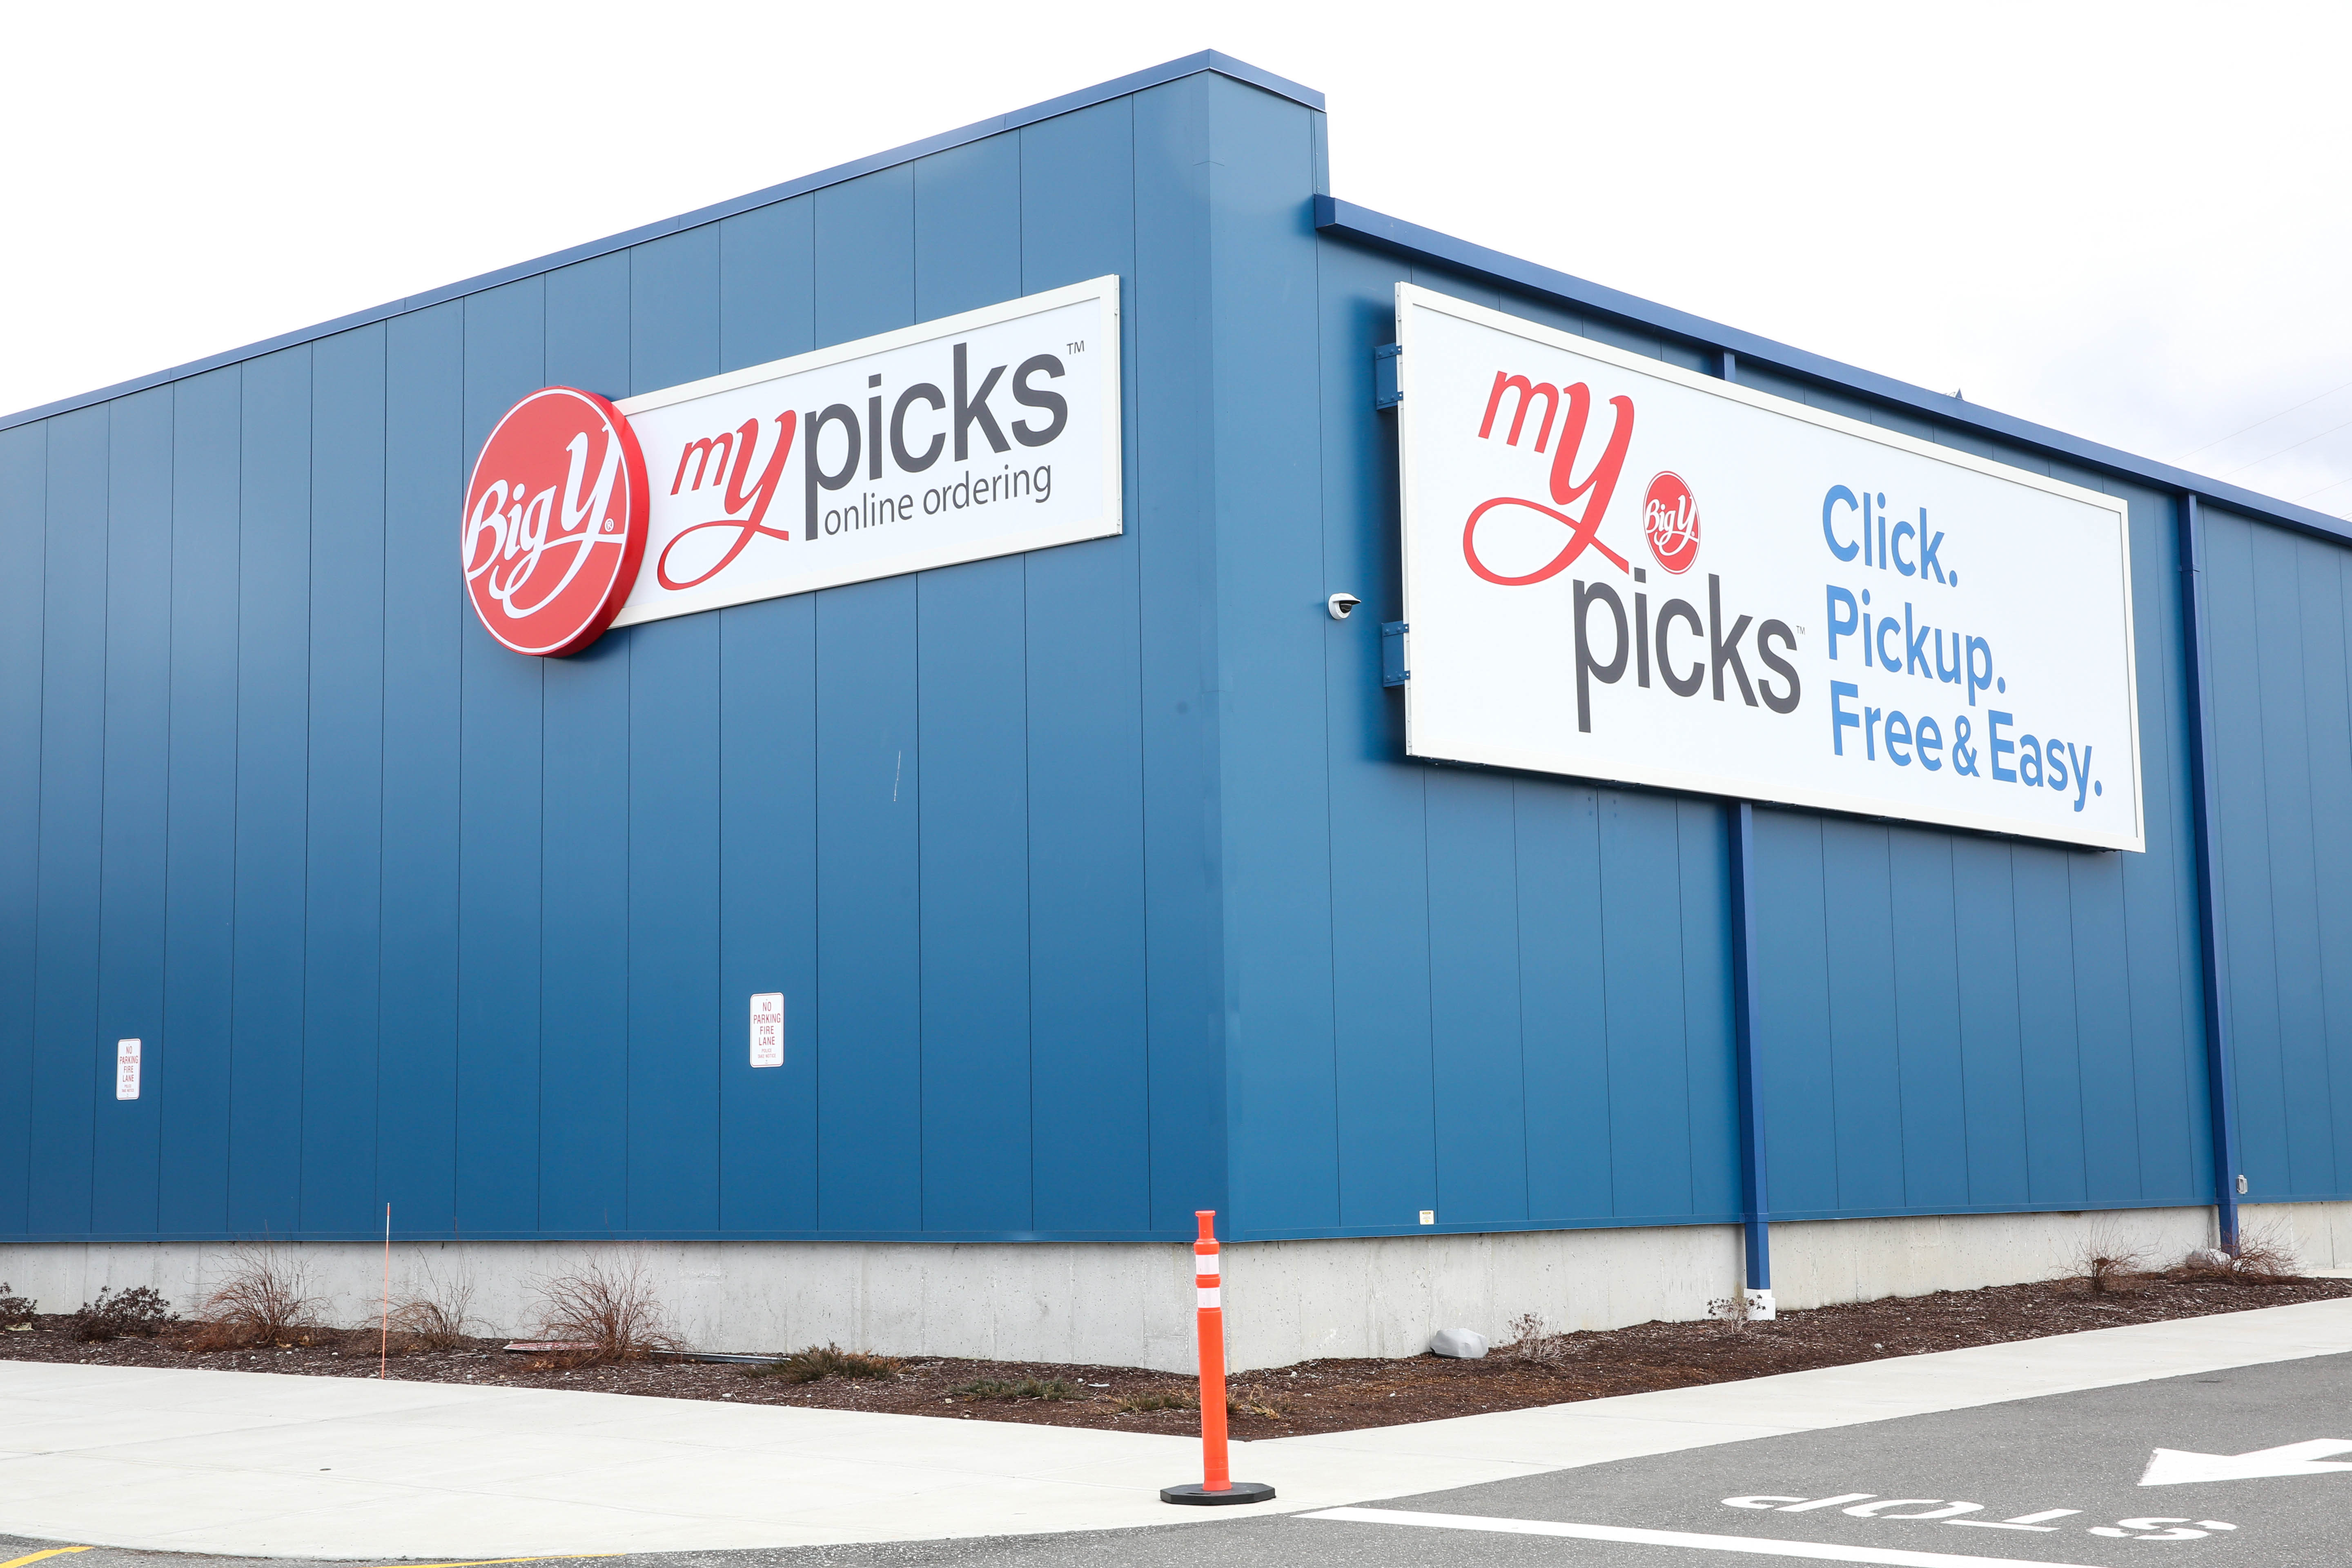 How Big Y's micro-fulfillment center has boosted e-commerce sales